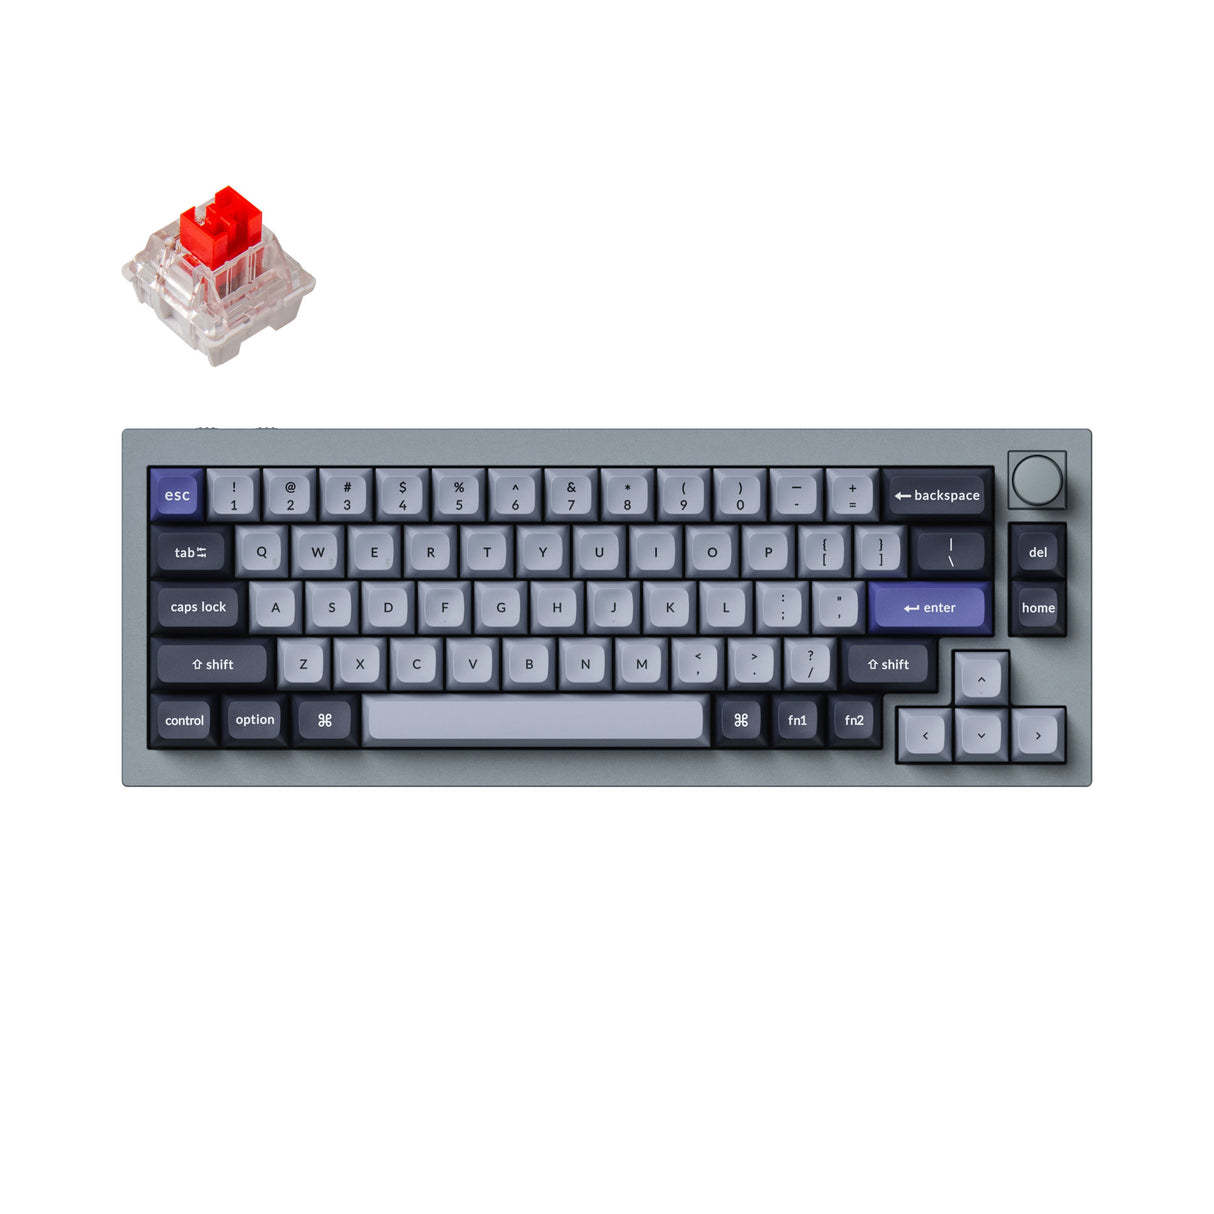 Keychron Q2 Pro QMK/VIA wireless custom mechanical keyboard 65 percent layout full aluminum grey frame for Mac WIndows Linux with RGB backlight and hot-swappable K Pro switch red